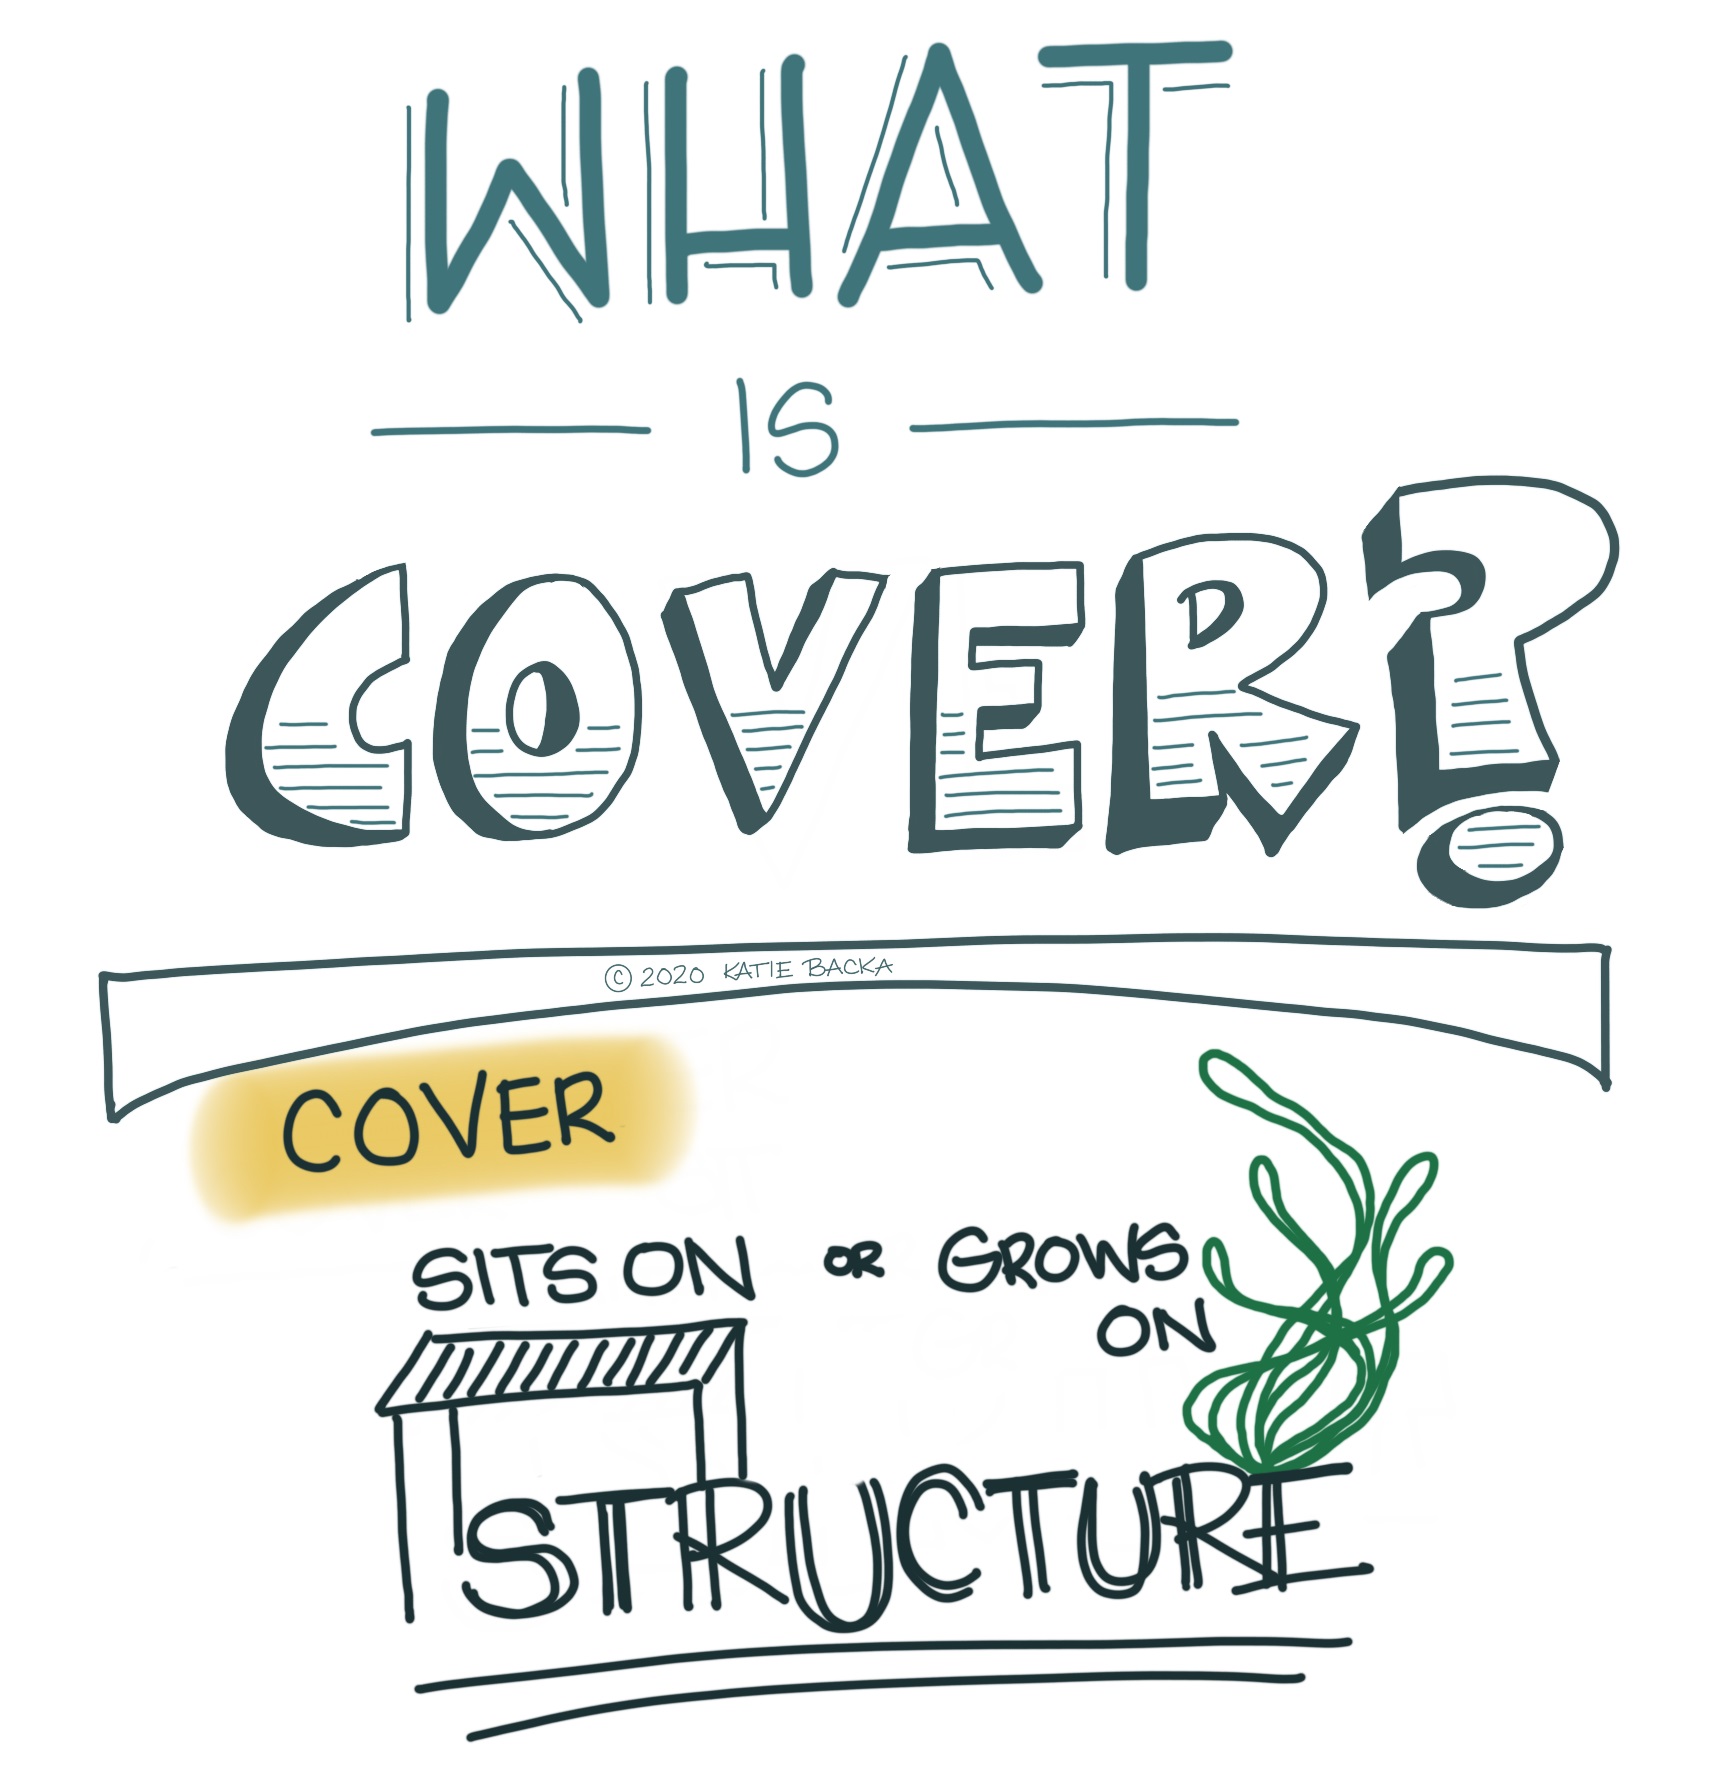 Script: What is Cover? Cover sits on or grows on structure